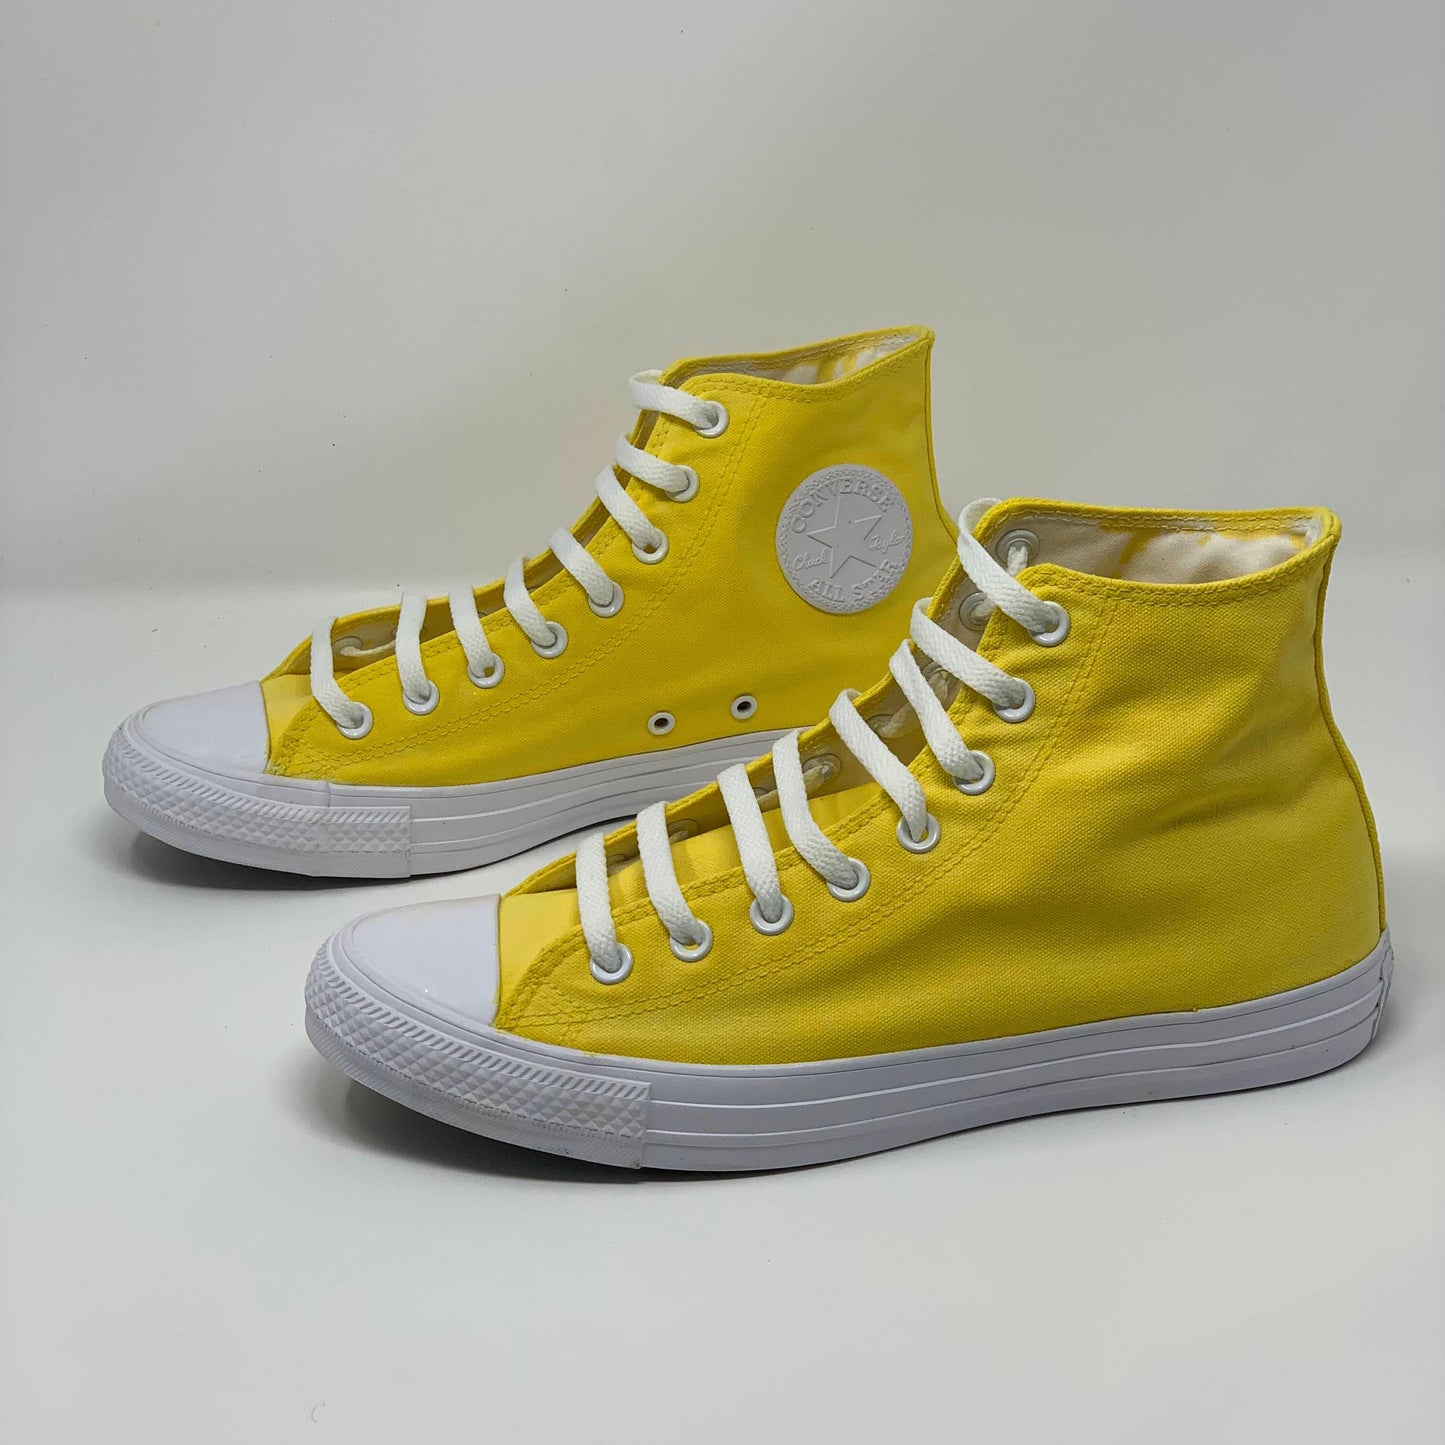 Banana Yellow Hi Top Converse with white background